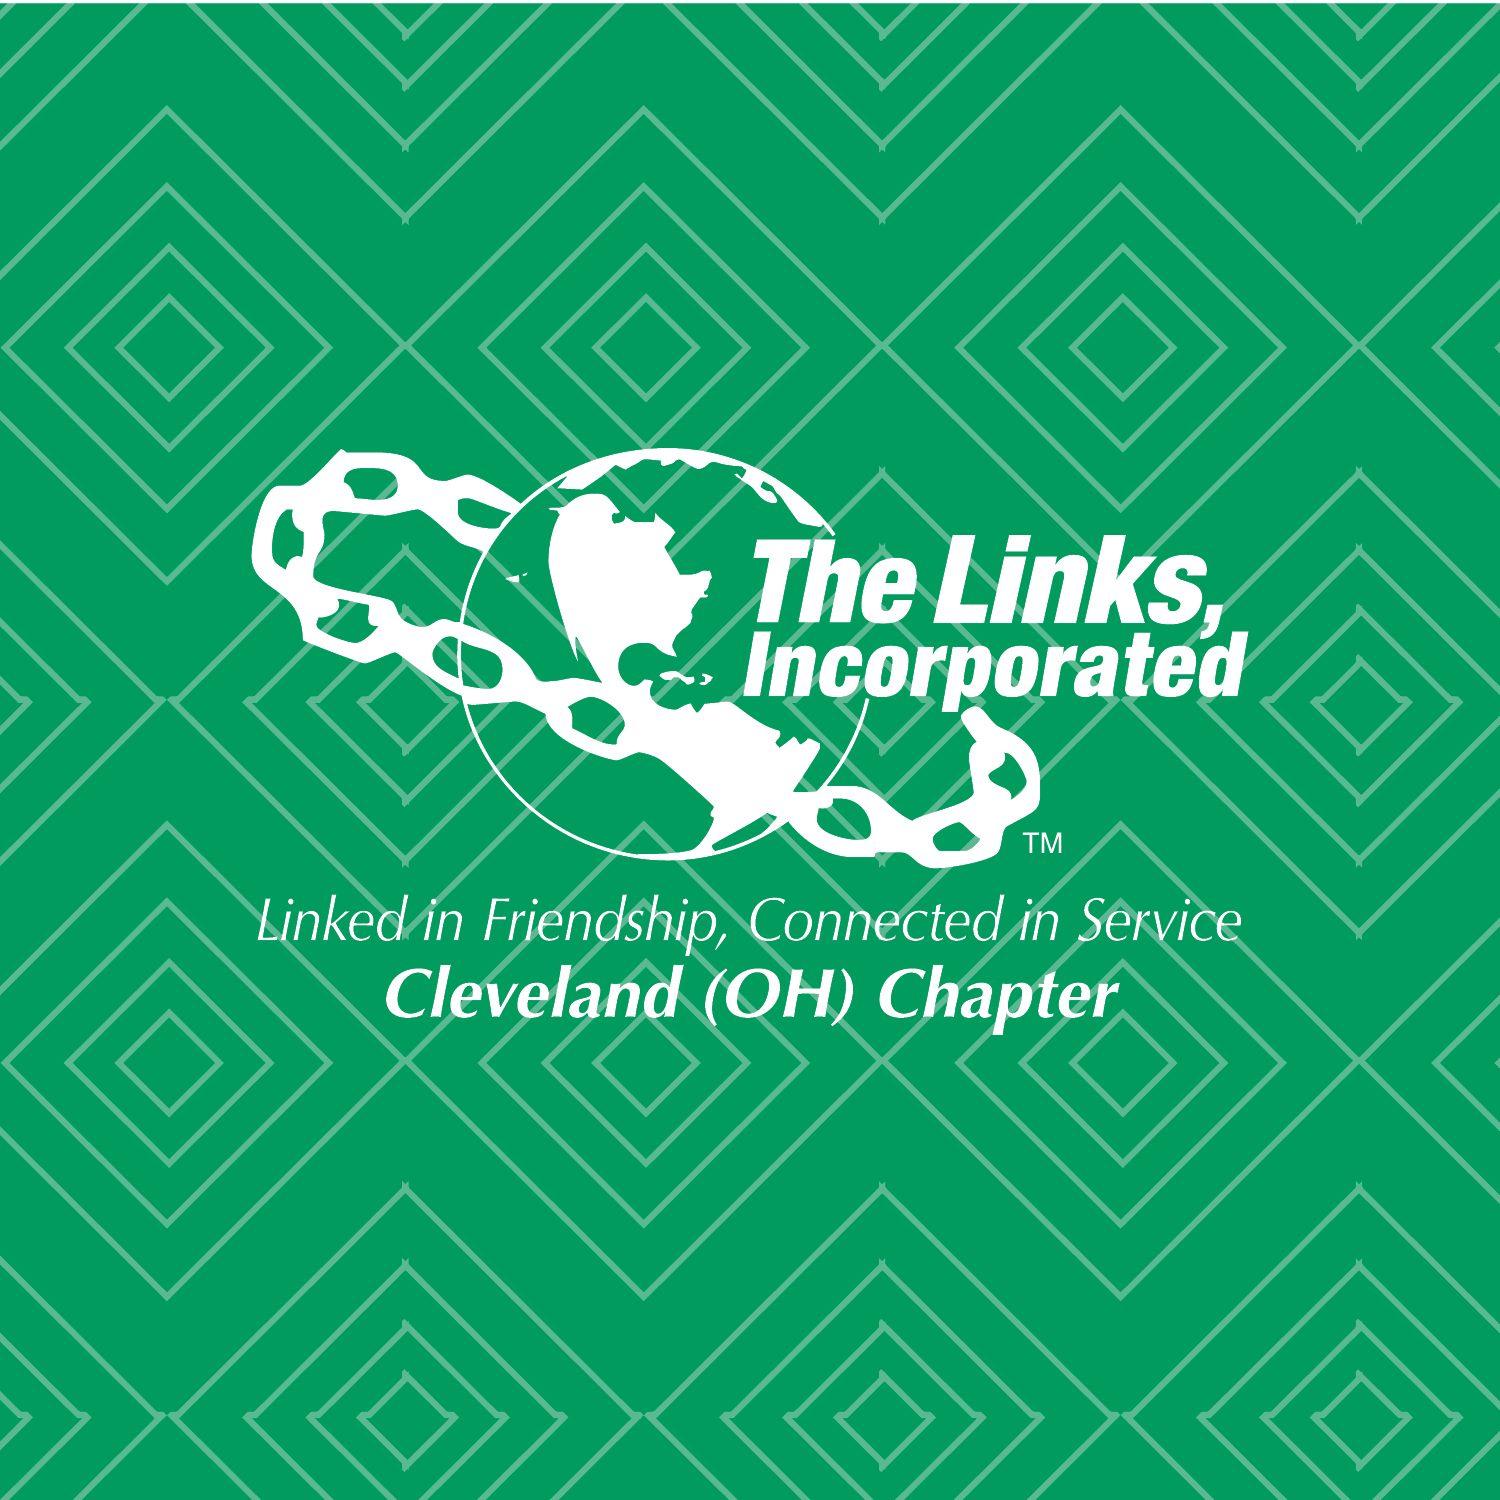 Links, Incorporated, Cleveland Chapter, The